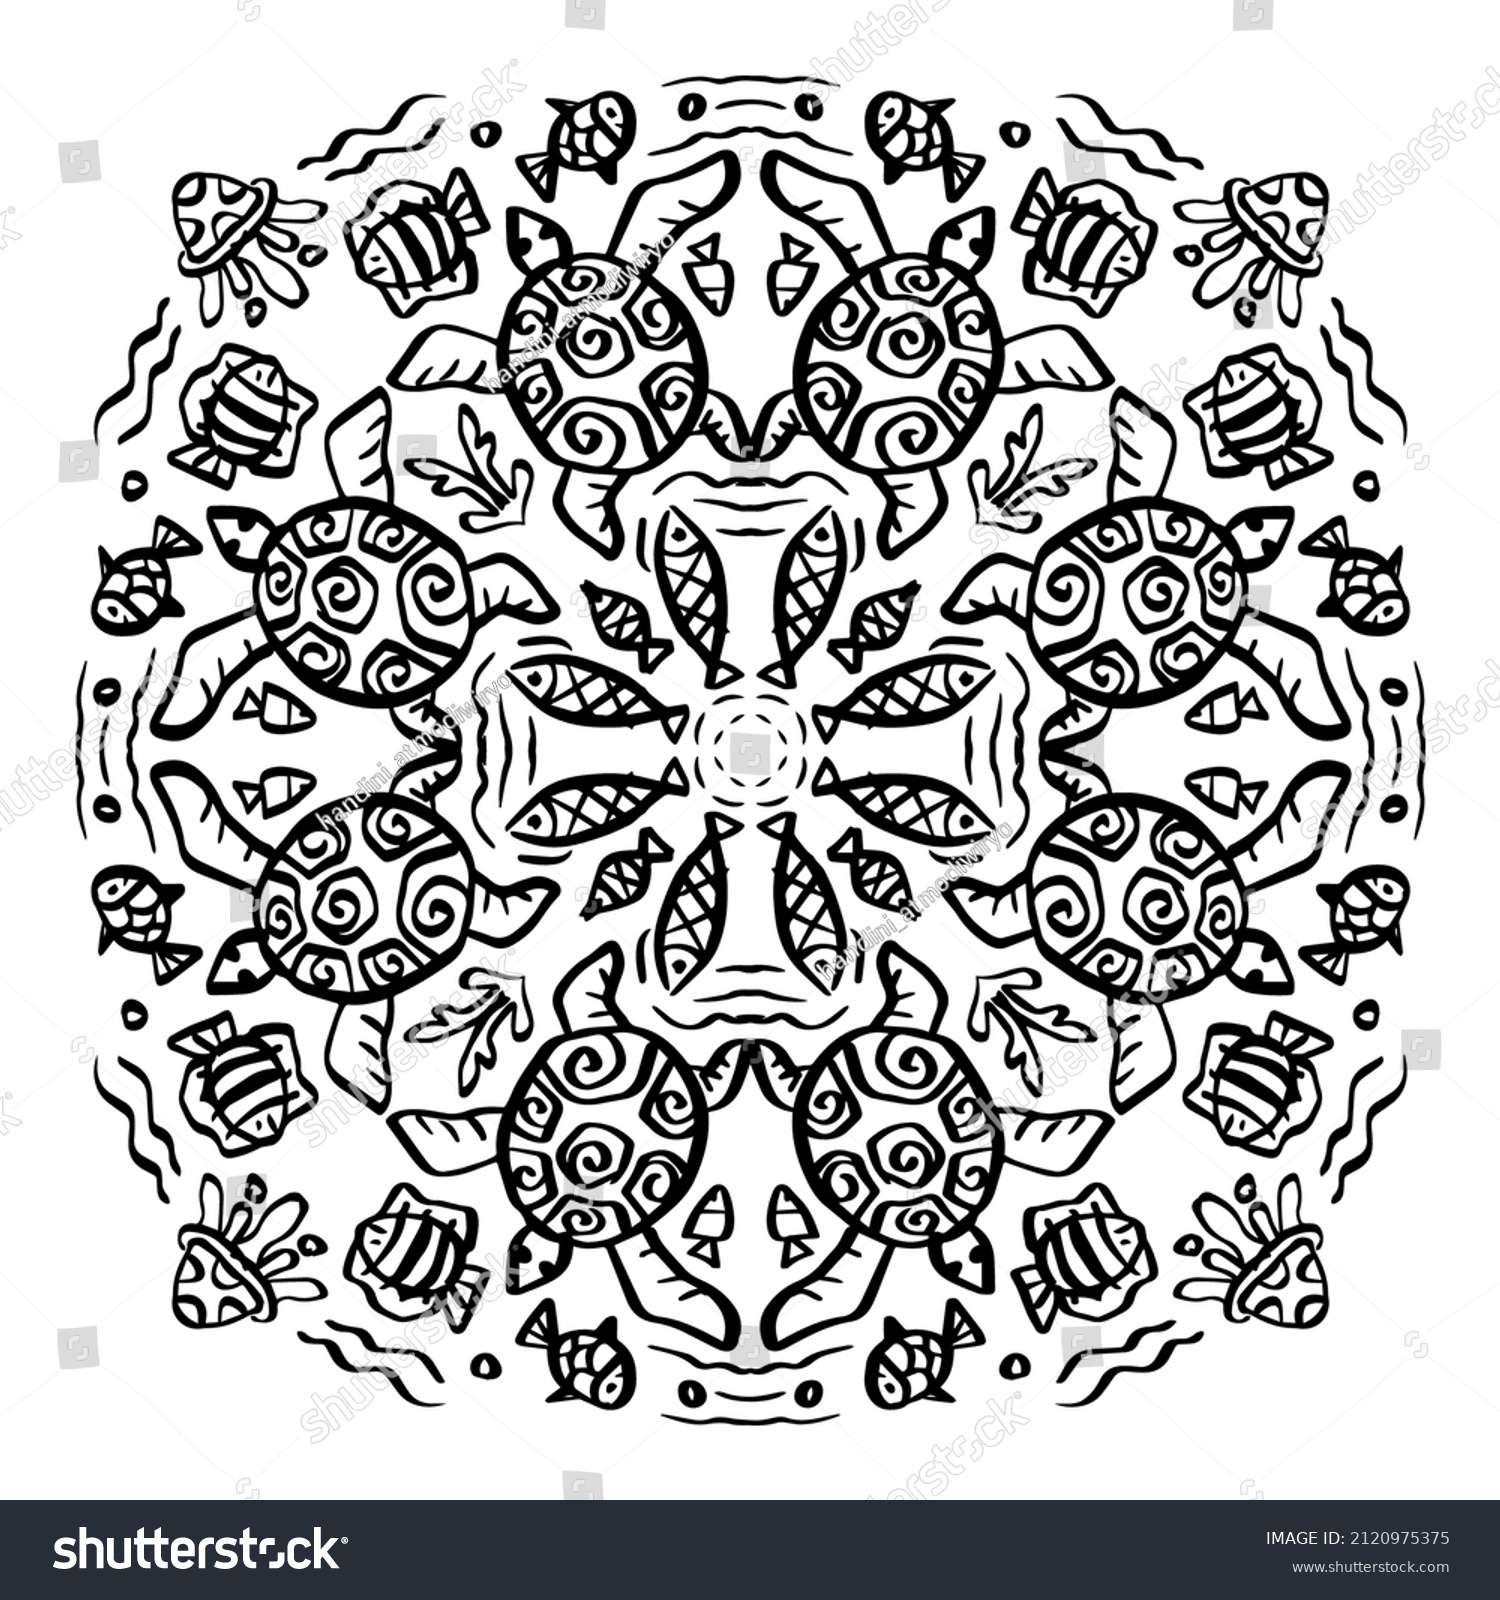 SVG of Mandala pattern with cute turtle svg